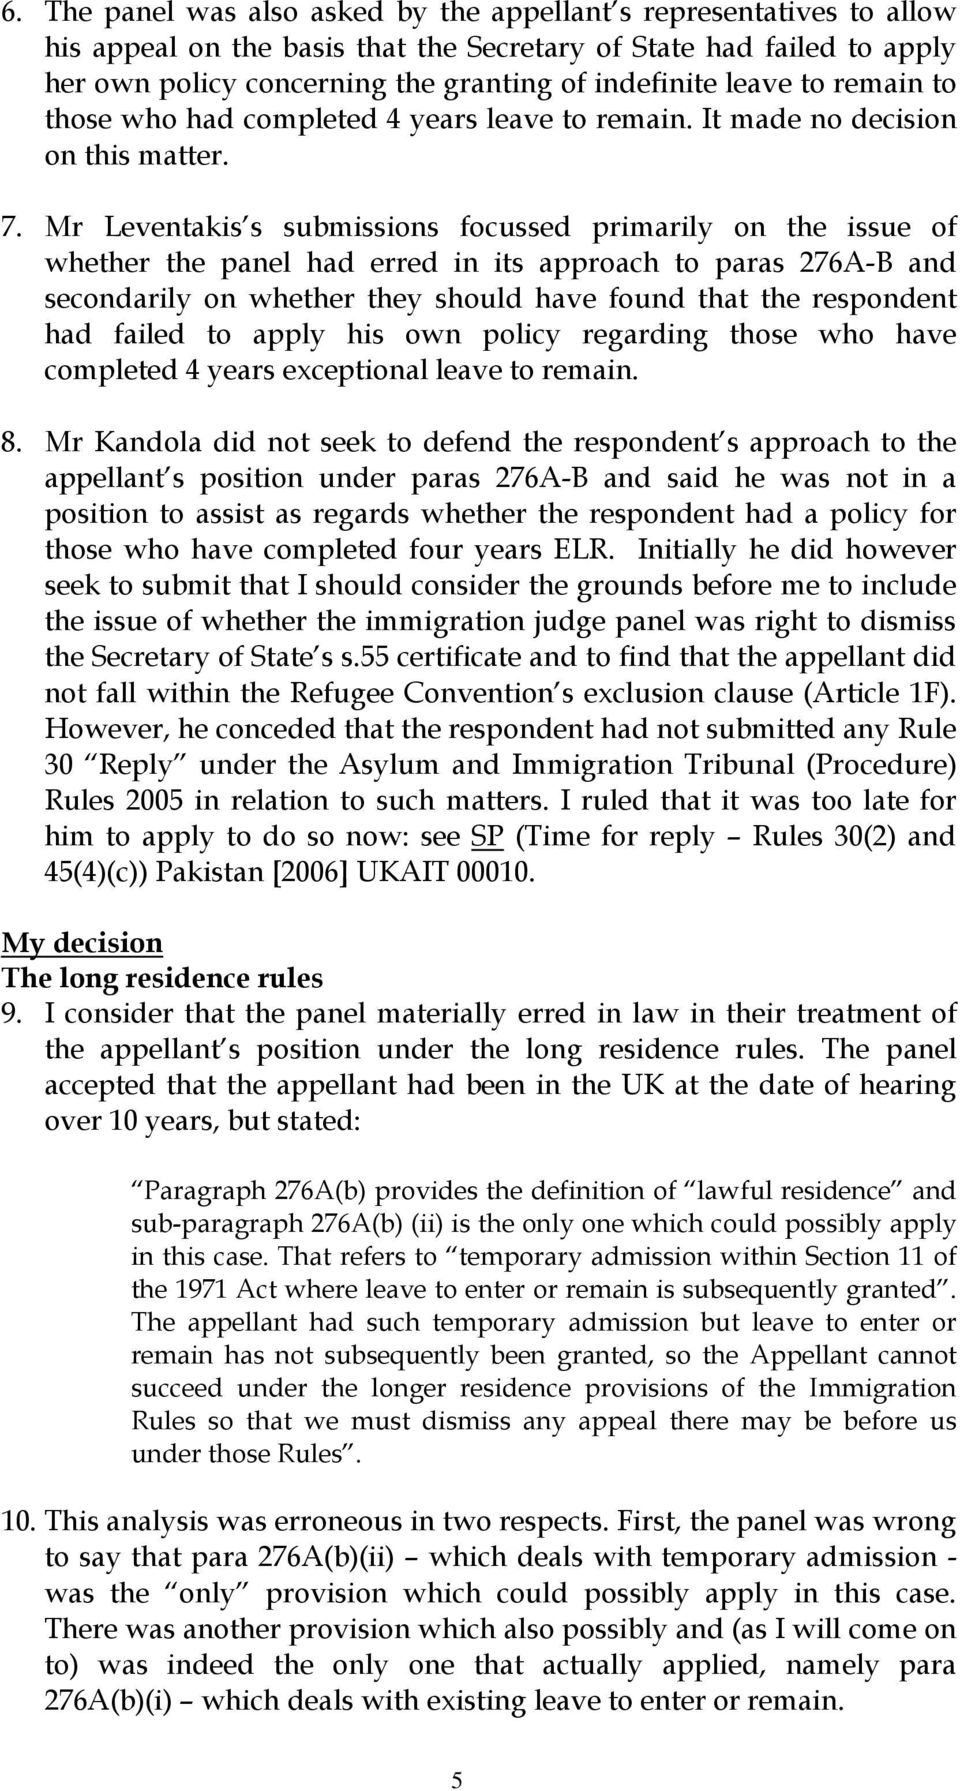 Mr Leventakis s submissions focussed primarily on the issue of whether the panel had erred in its approach to paras 276A-B and secondarily on whether they should have found that the respondent had